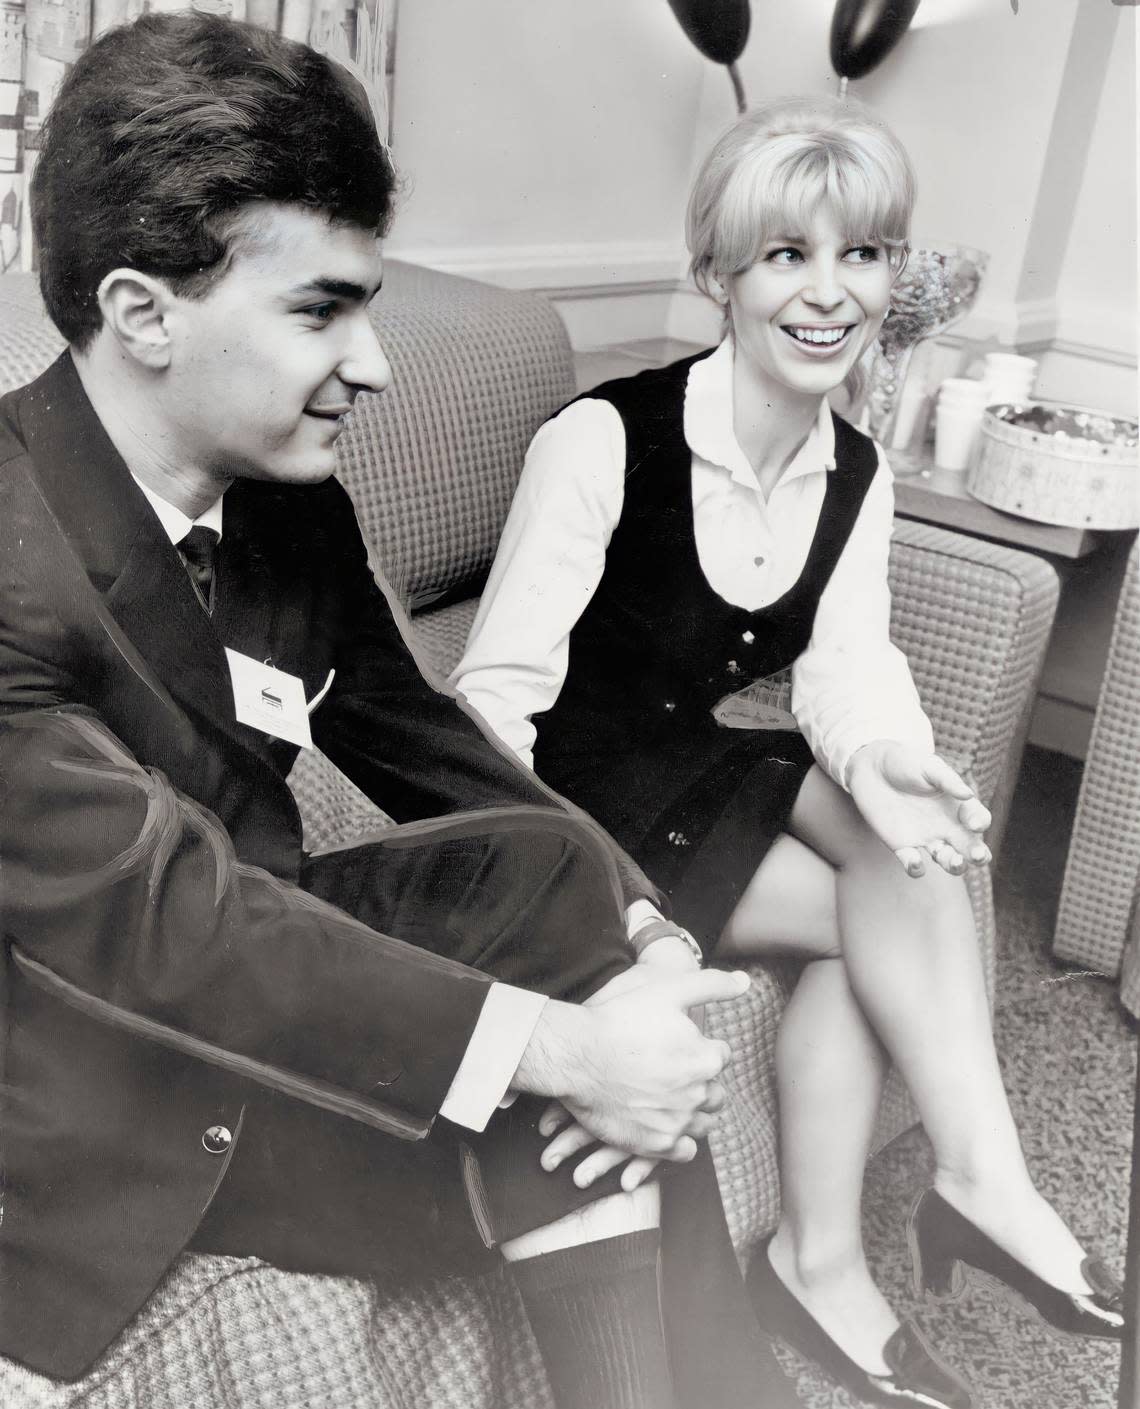 Radu Lupu, left, a Romanian contestant in the Van Cliburn International Piano Competition in Fort Worth, met translator Helga Beckman, a German of Romanian descent, during the 1966 contest.